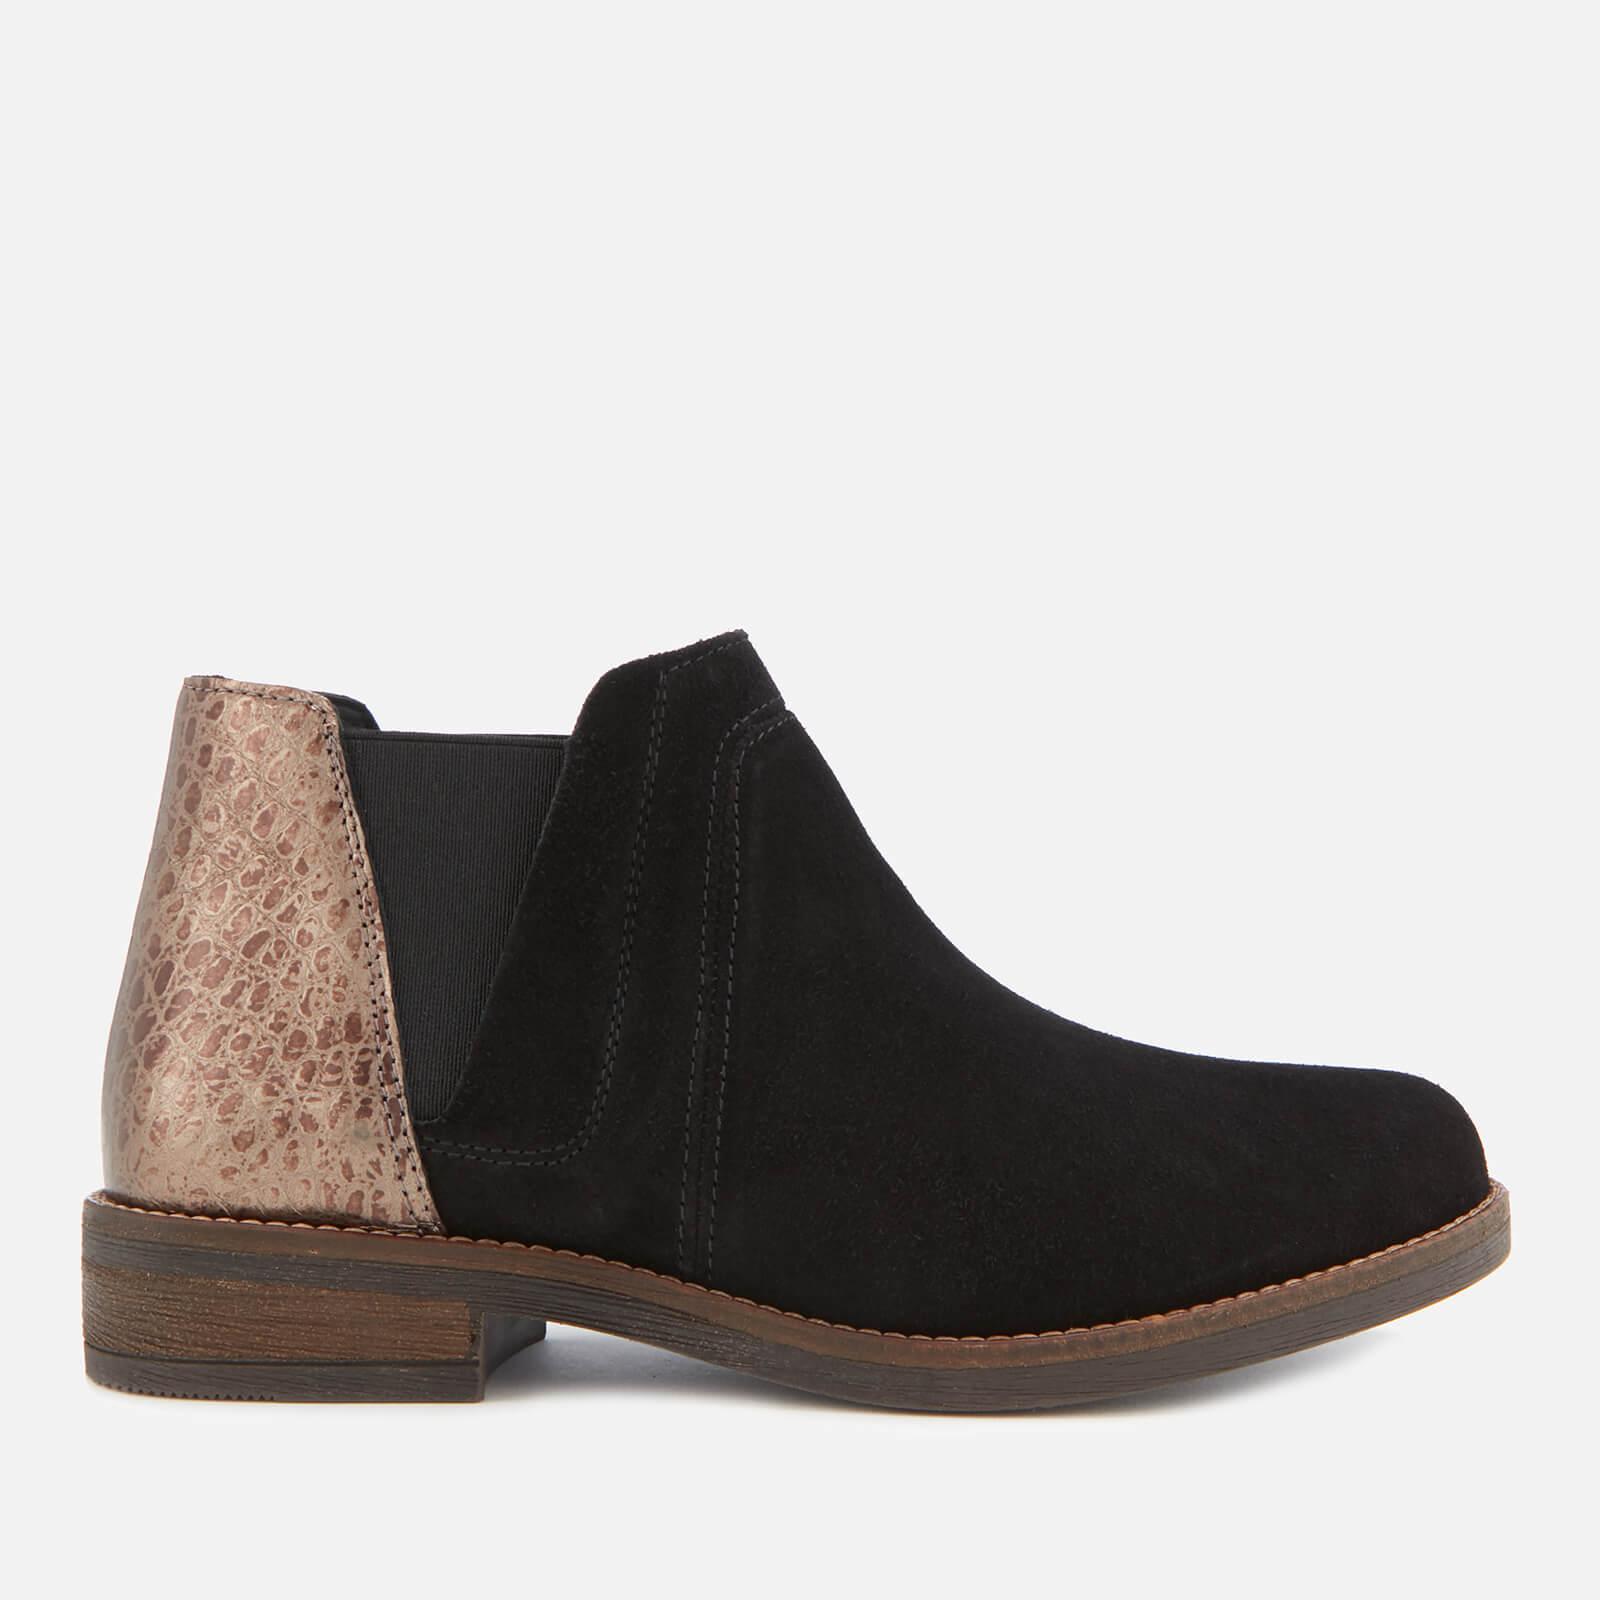 Clarks Demi Beat Suede Ankle Boots in Black - Lyst